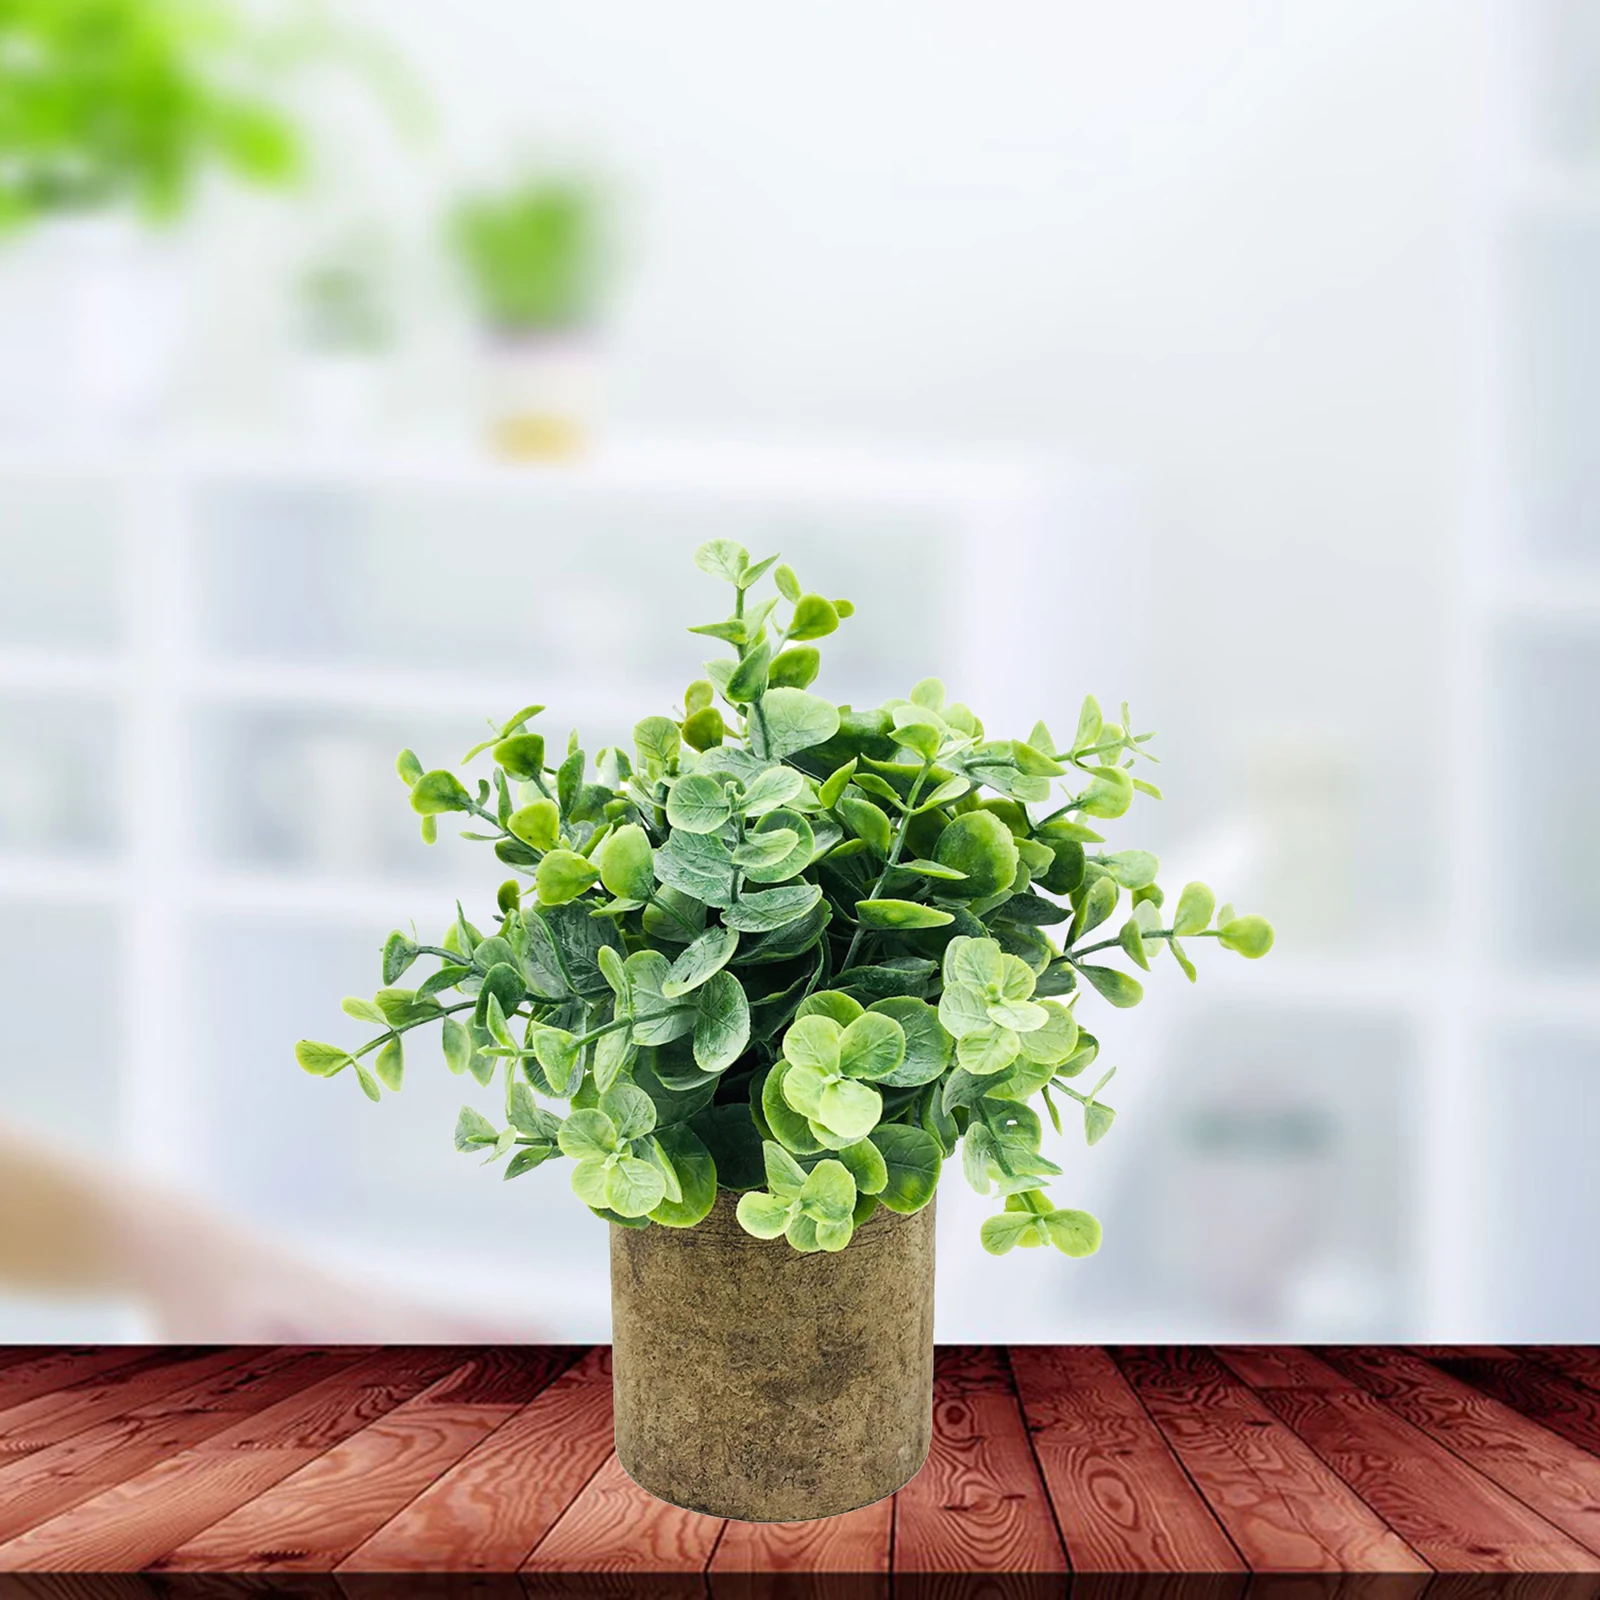 Faux Eucalyptus Plants Potted, Artificial Plant in Pot Fake Green Plant Bonsai for Office, Home, Kitchen, Table Indoor Decor